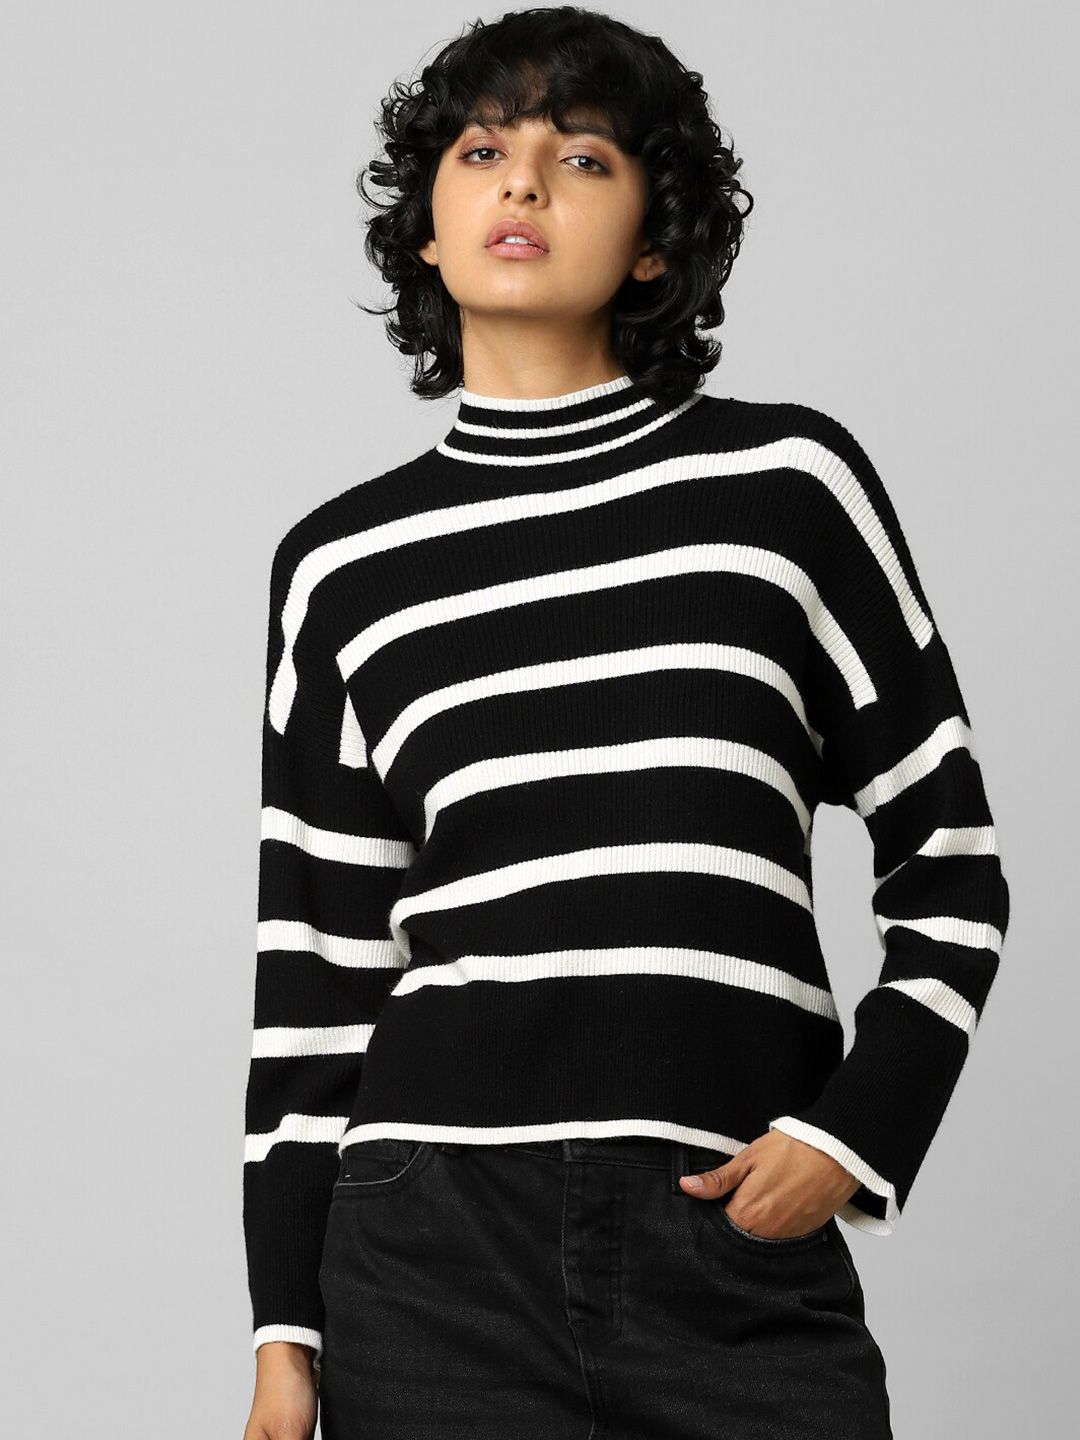 ONLY Women Black & White Striped Pullover Price in India